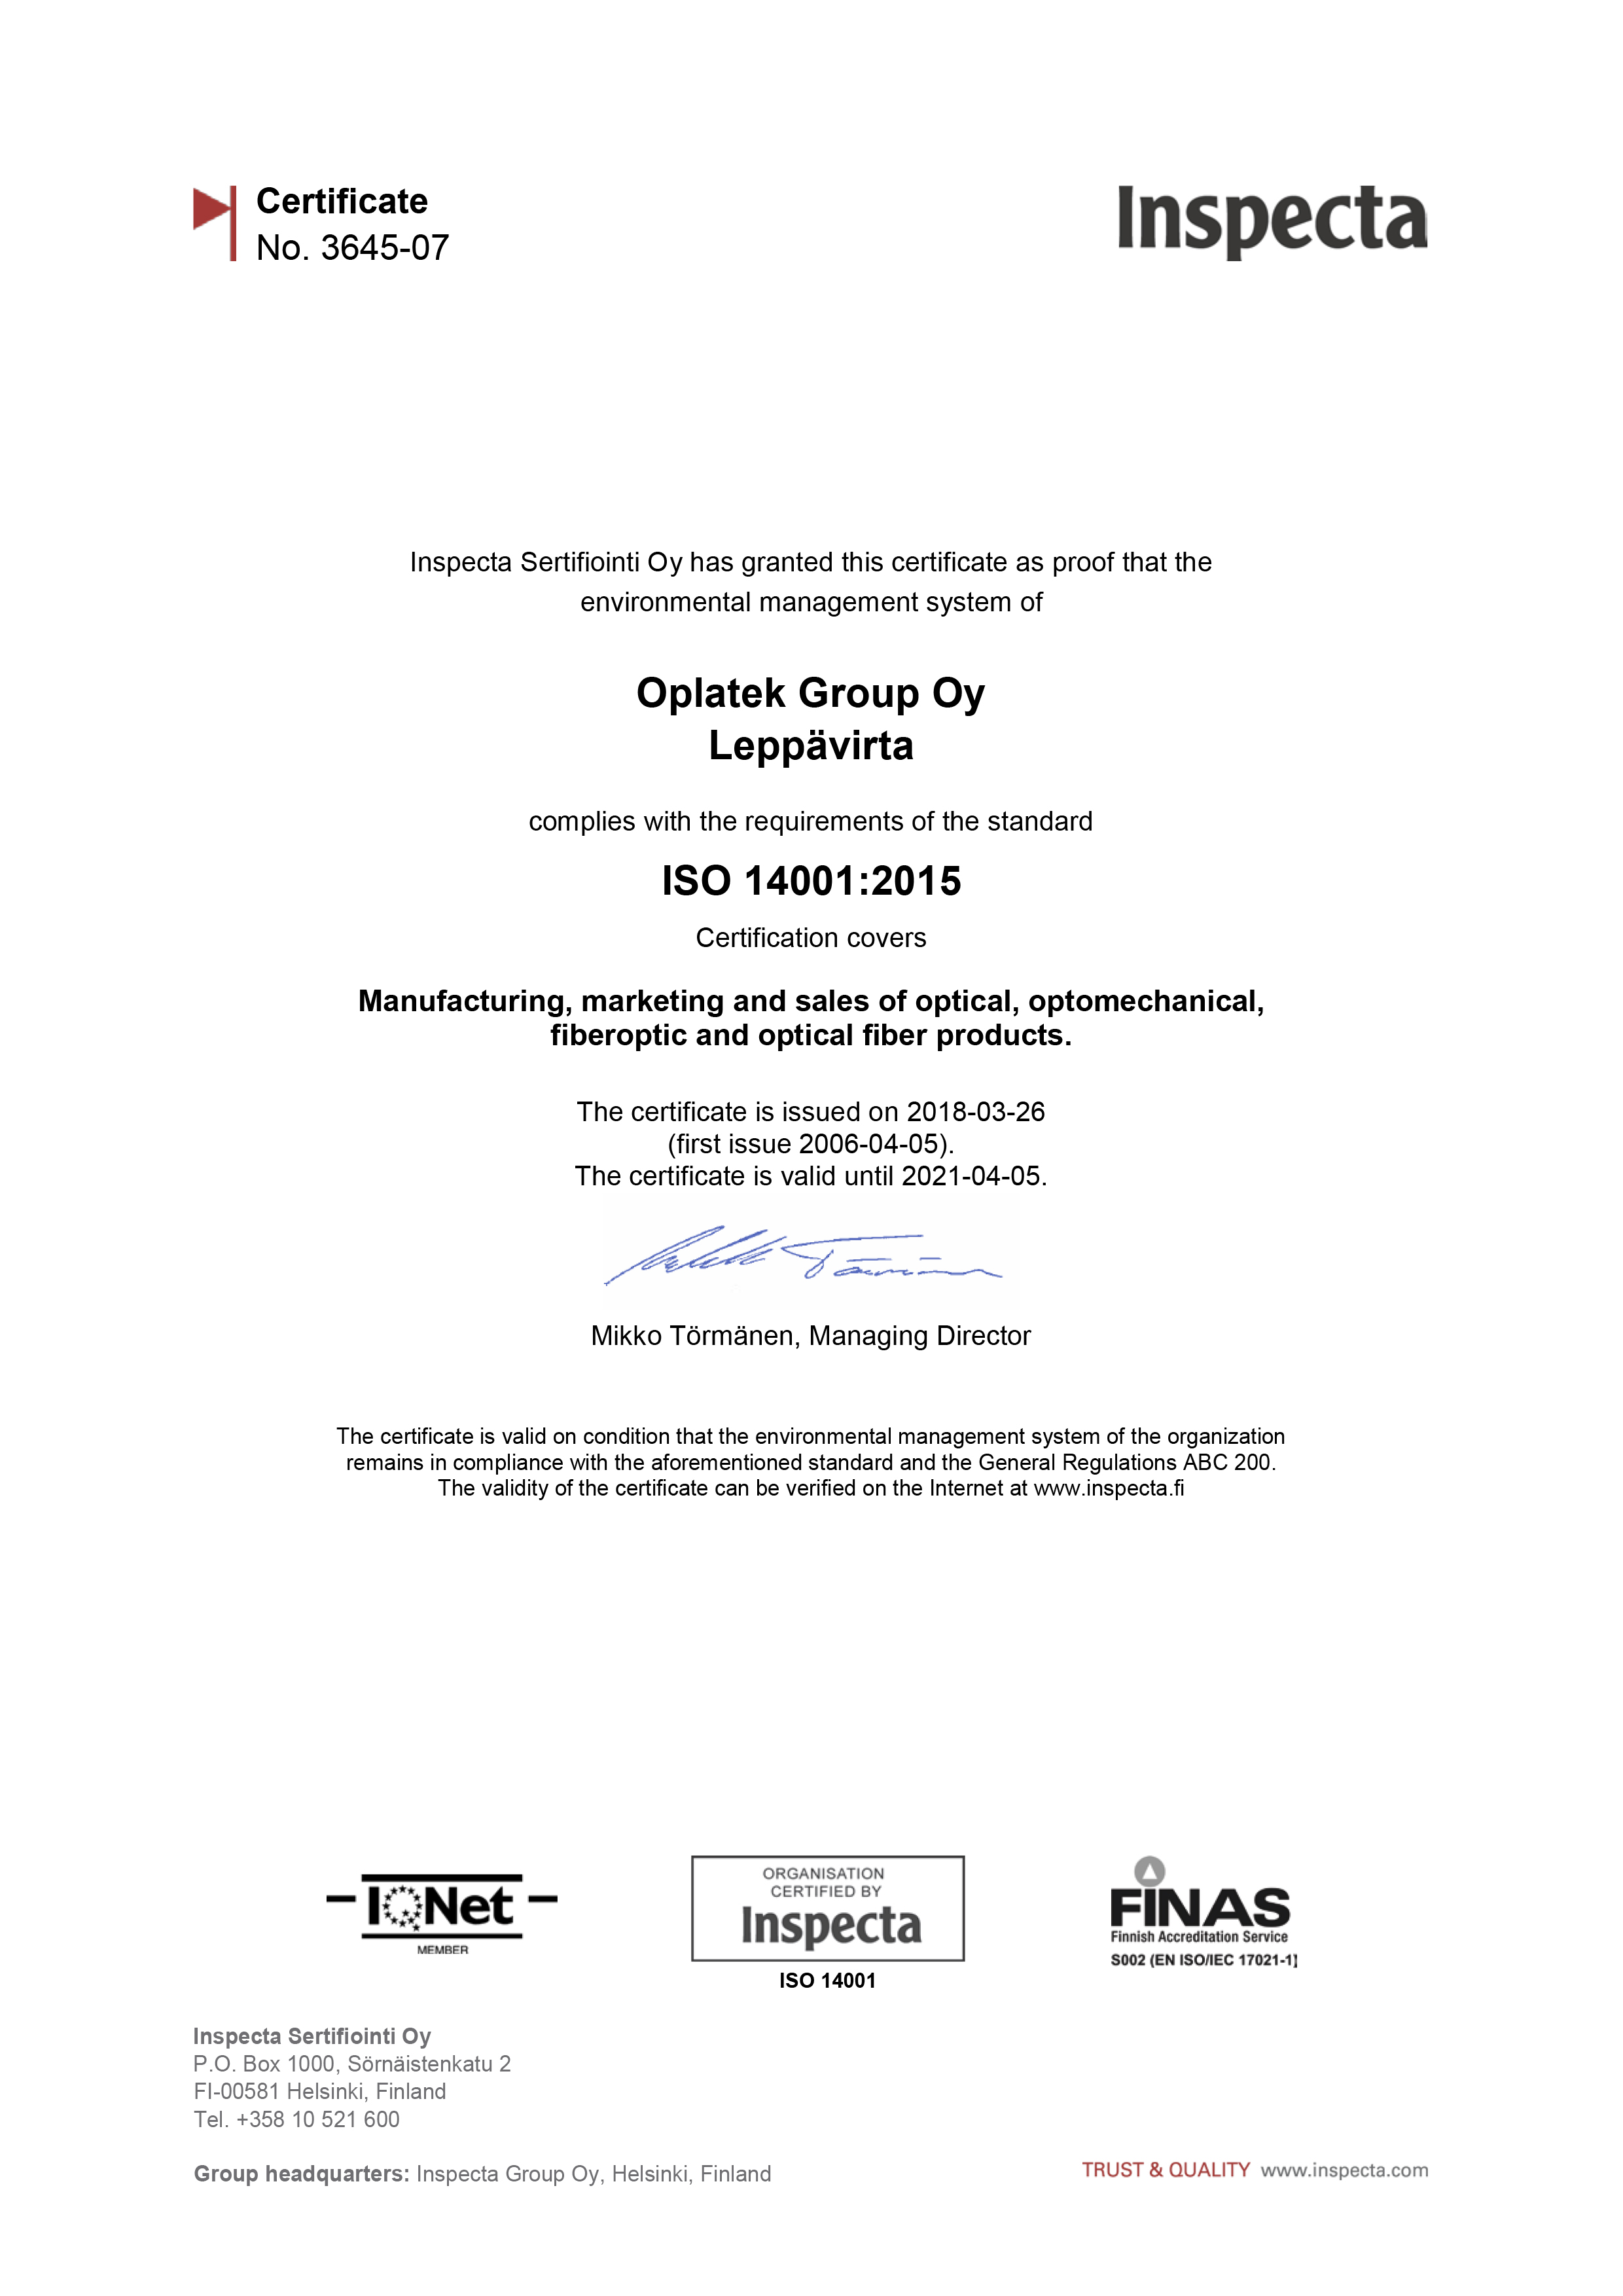 Oplatek Group Oy has appointed new Environmental Coordinator and Quality Manager